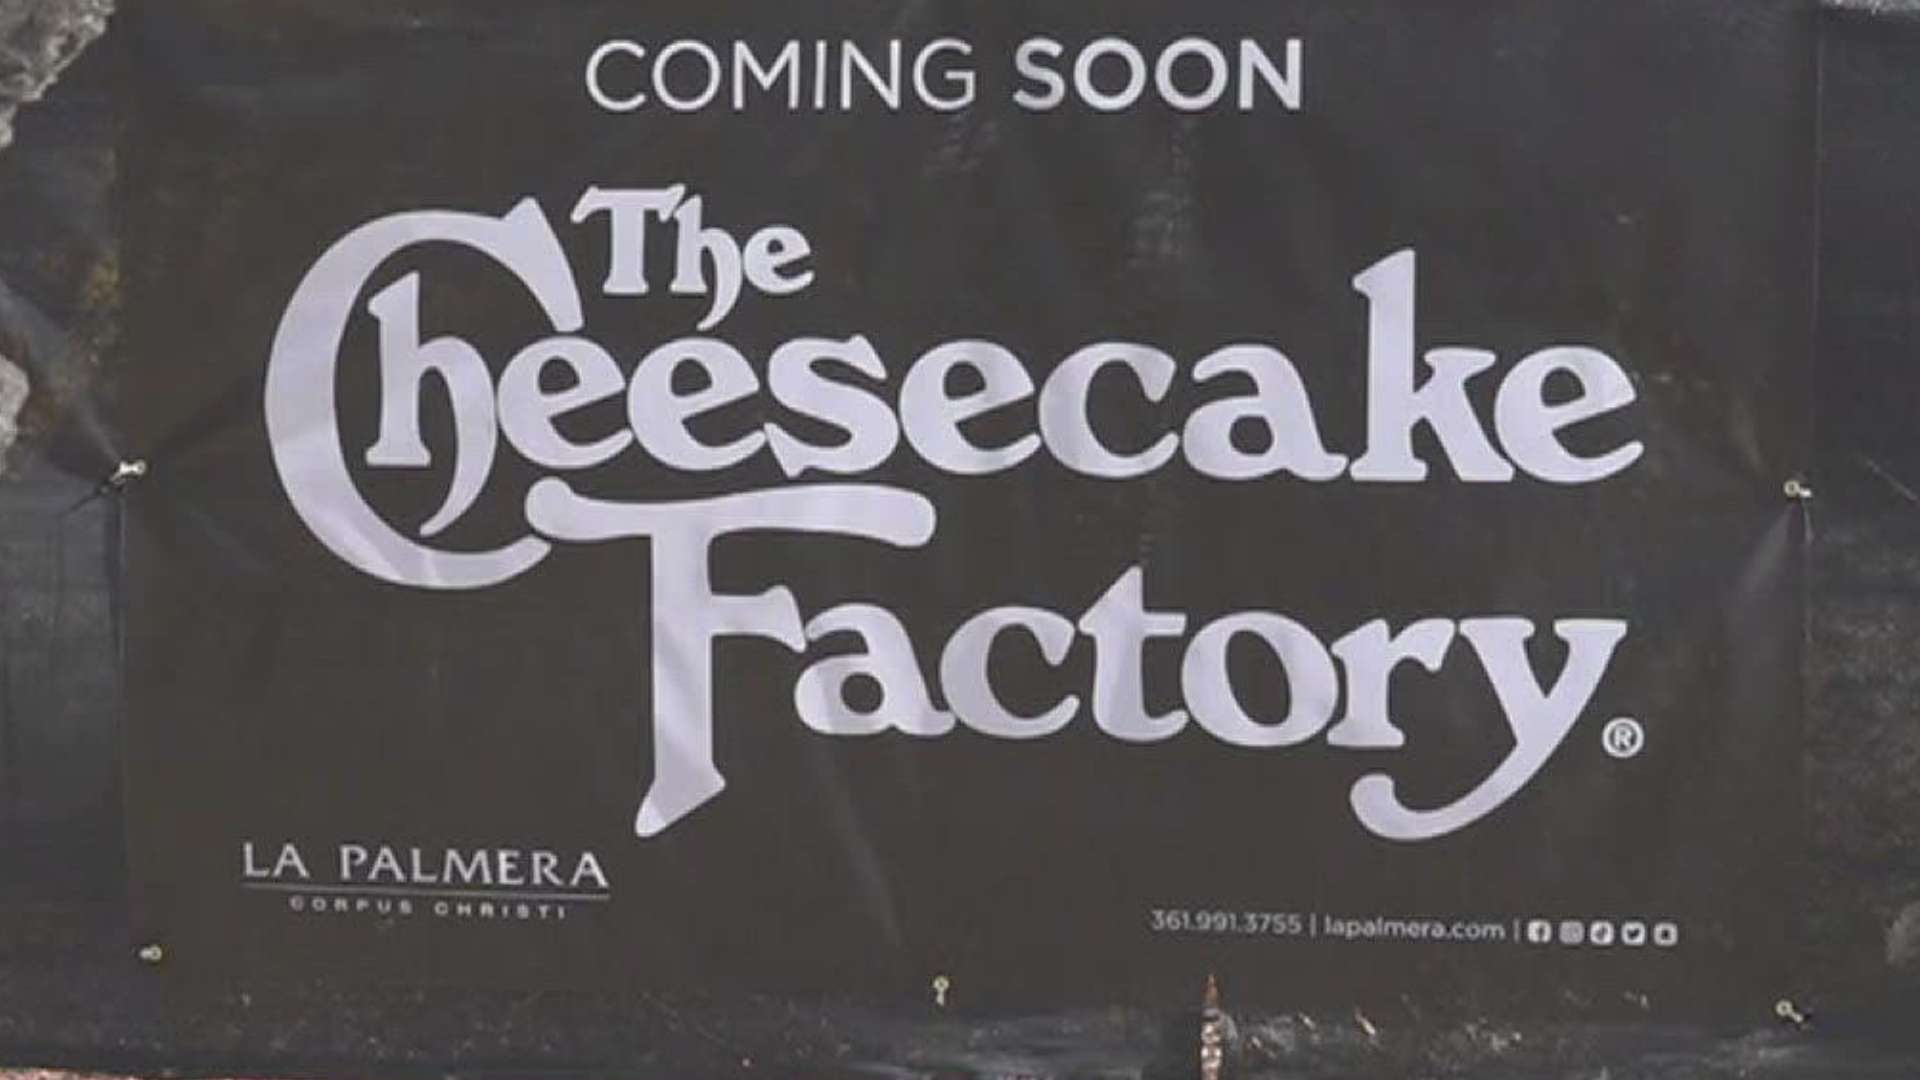 A favorite of many, The Cheesecake Factory will be adjacent to LongHorn Steakhouse.